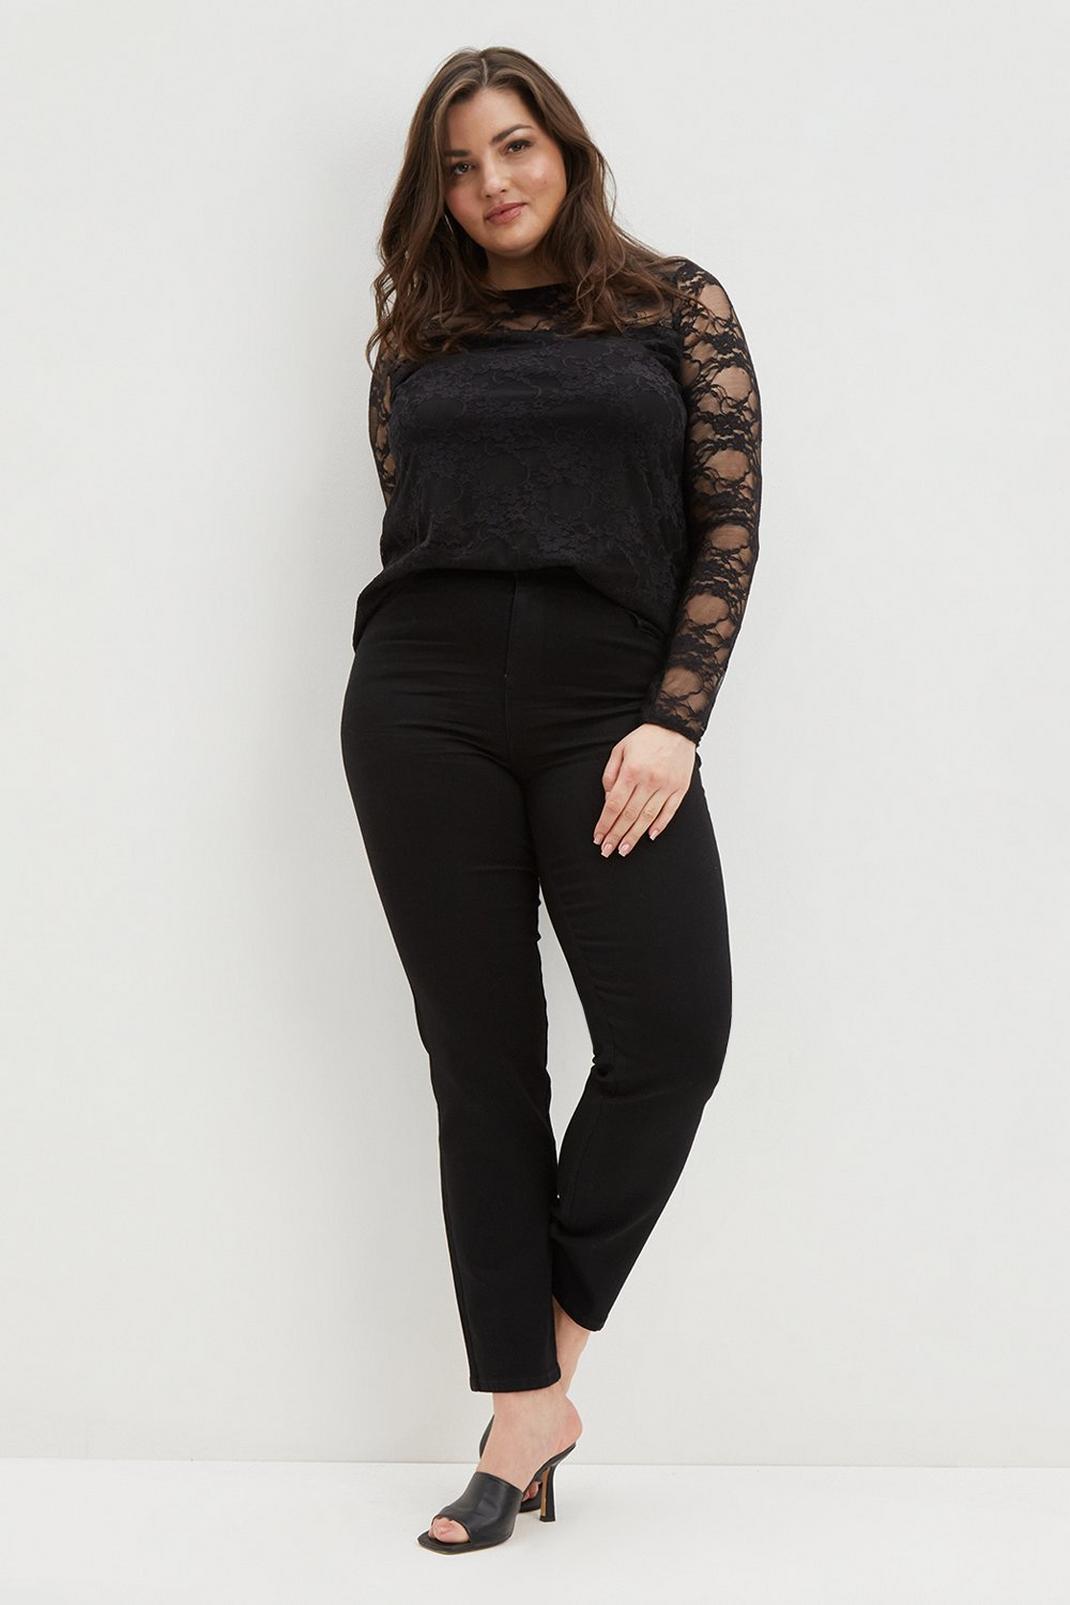 105 Curve Black Lace Long Sleeve Top  image number 2